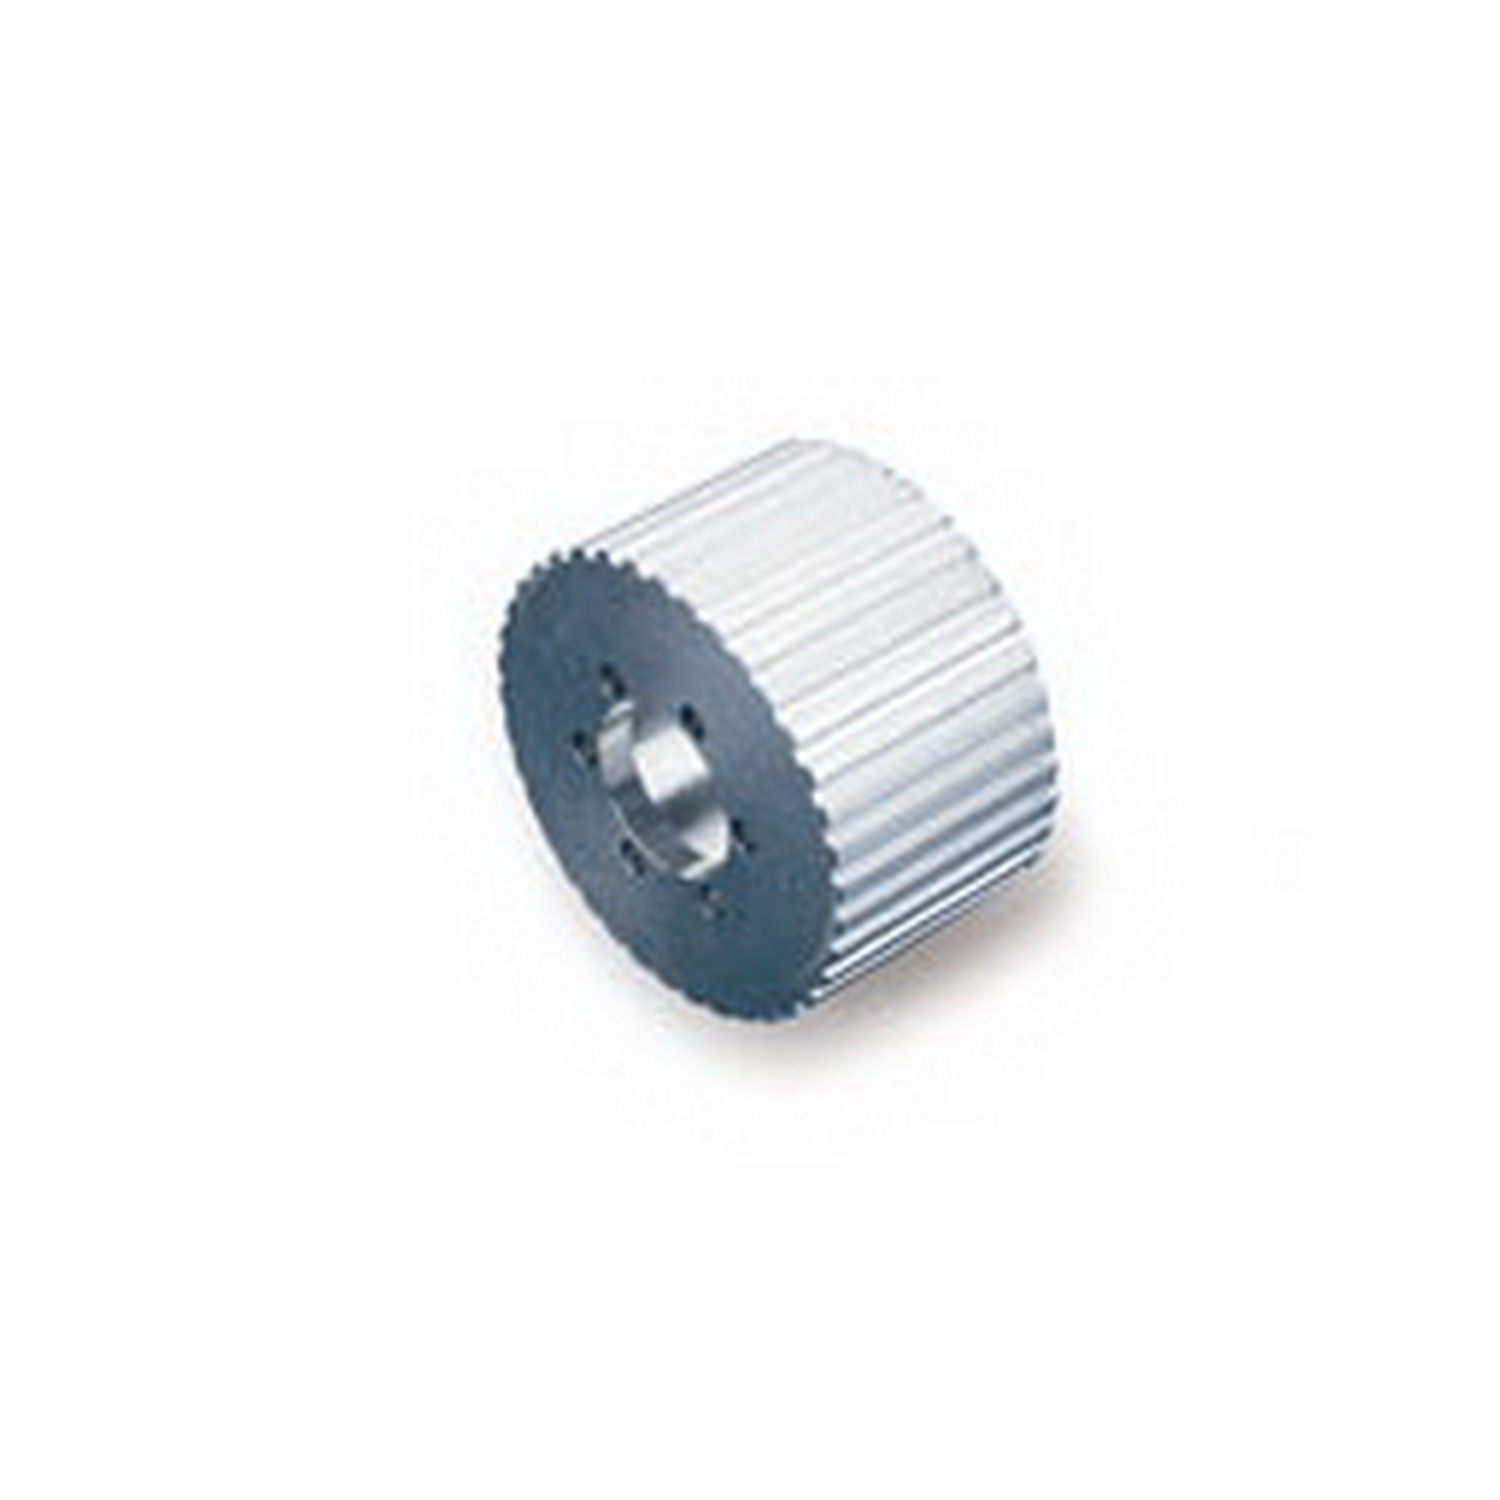 Weiand Weiand 7029-37 0.5 in. Pitch Drive Pulley